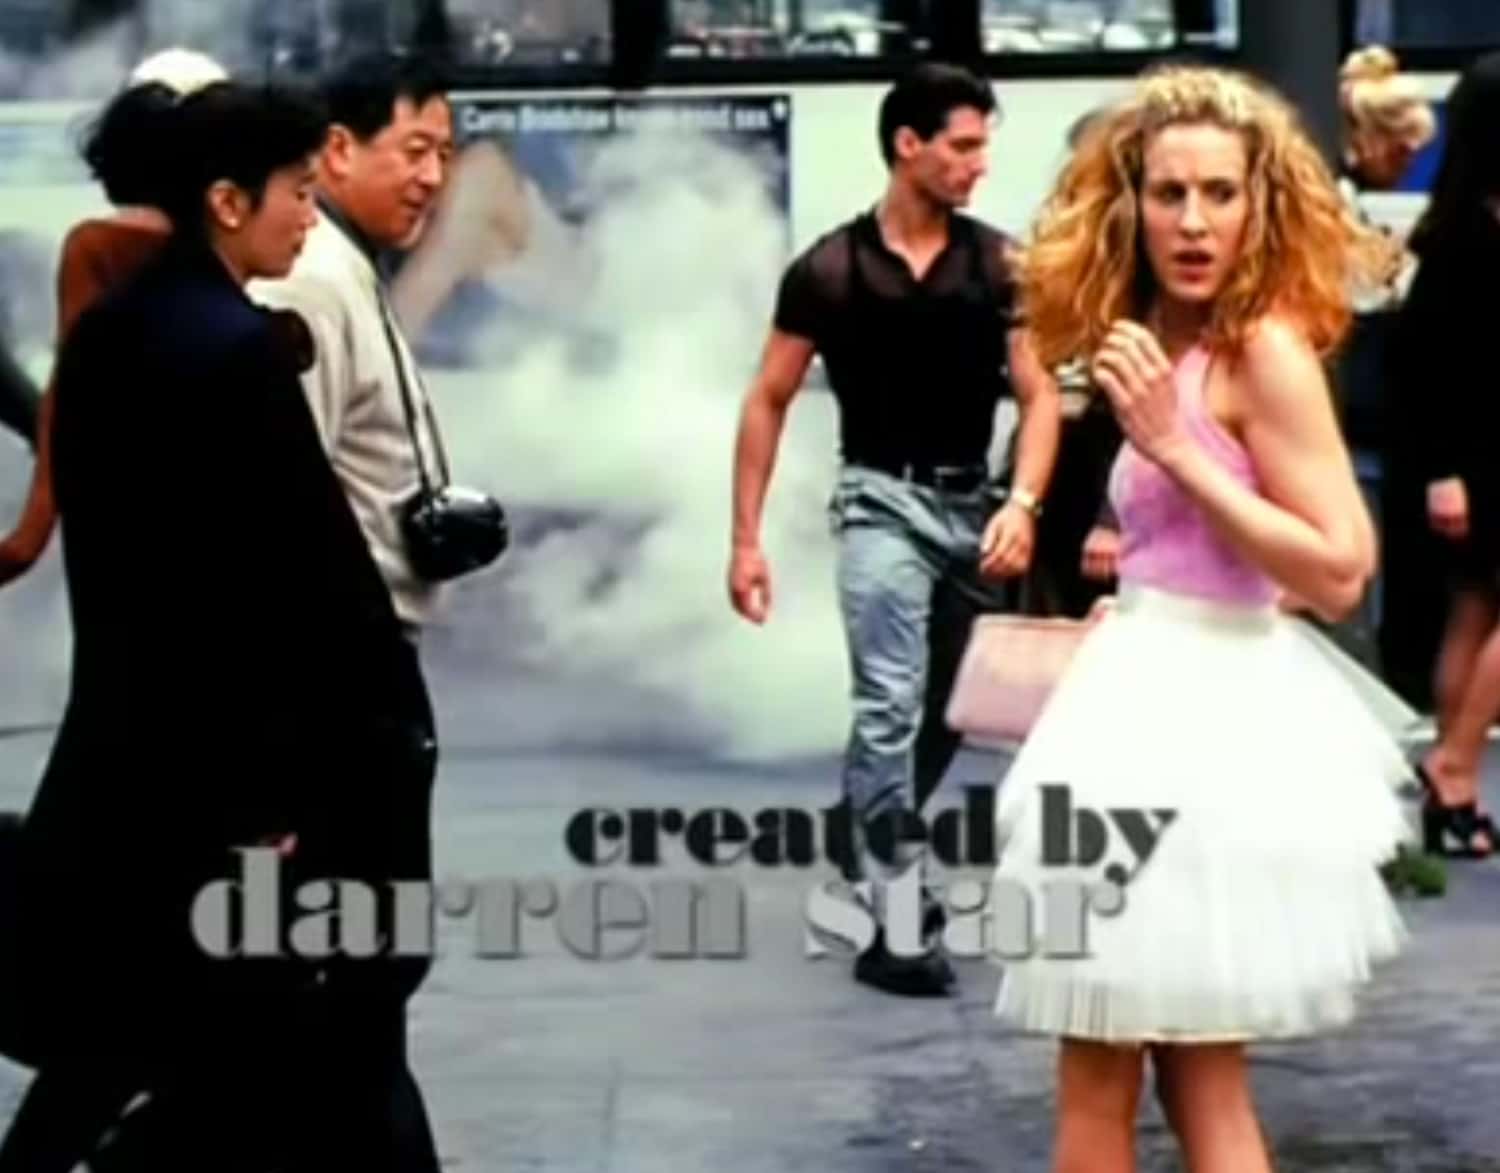 Sarah Jessica Parker as Carrie Bradshaw in the opening to Sex and the City ahead of the reboot